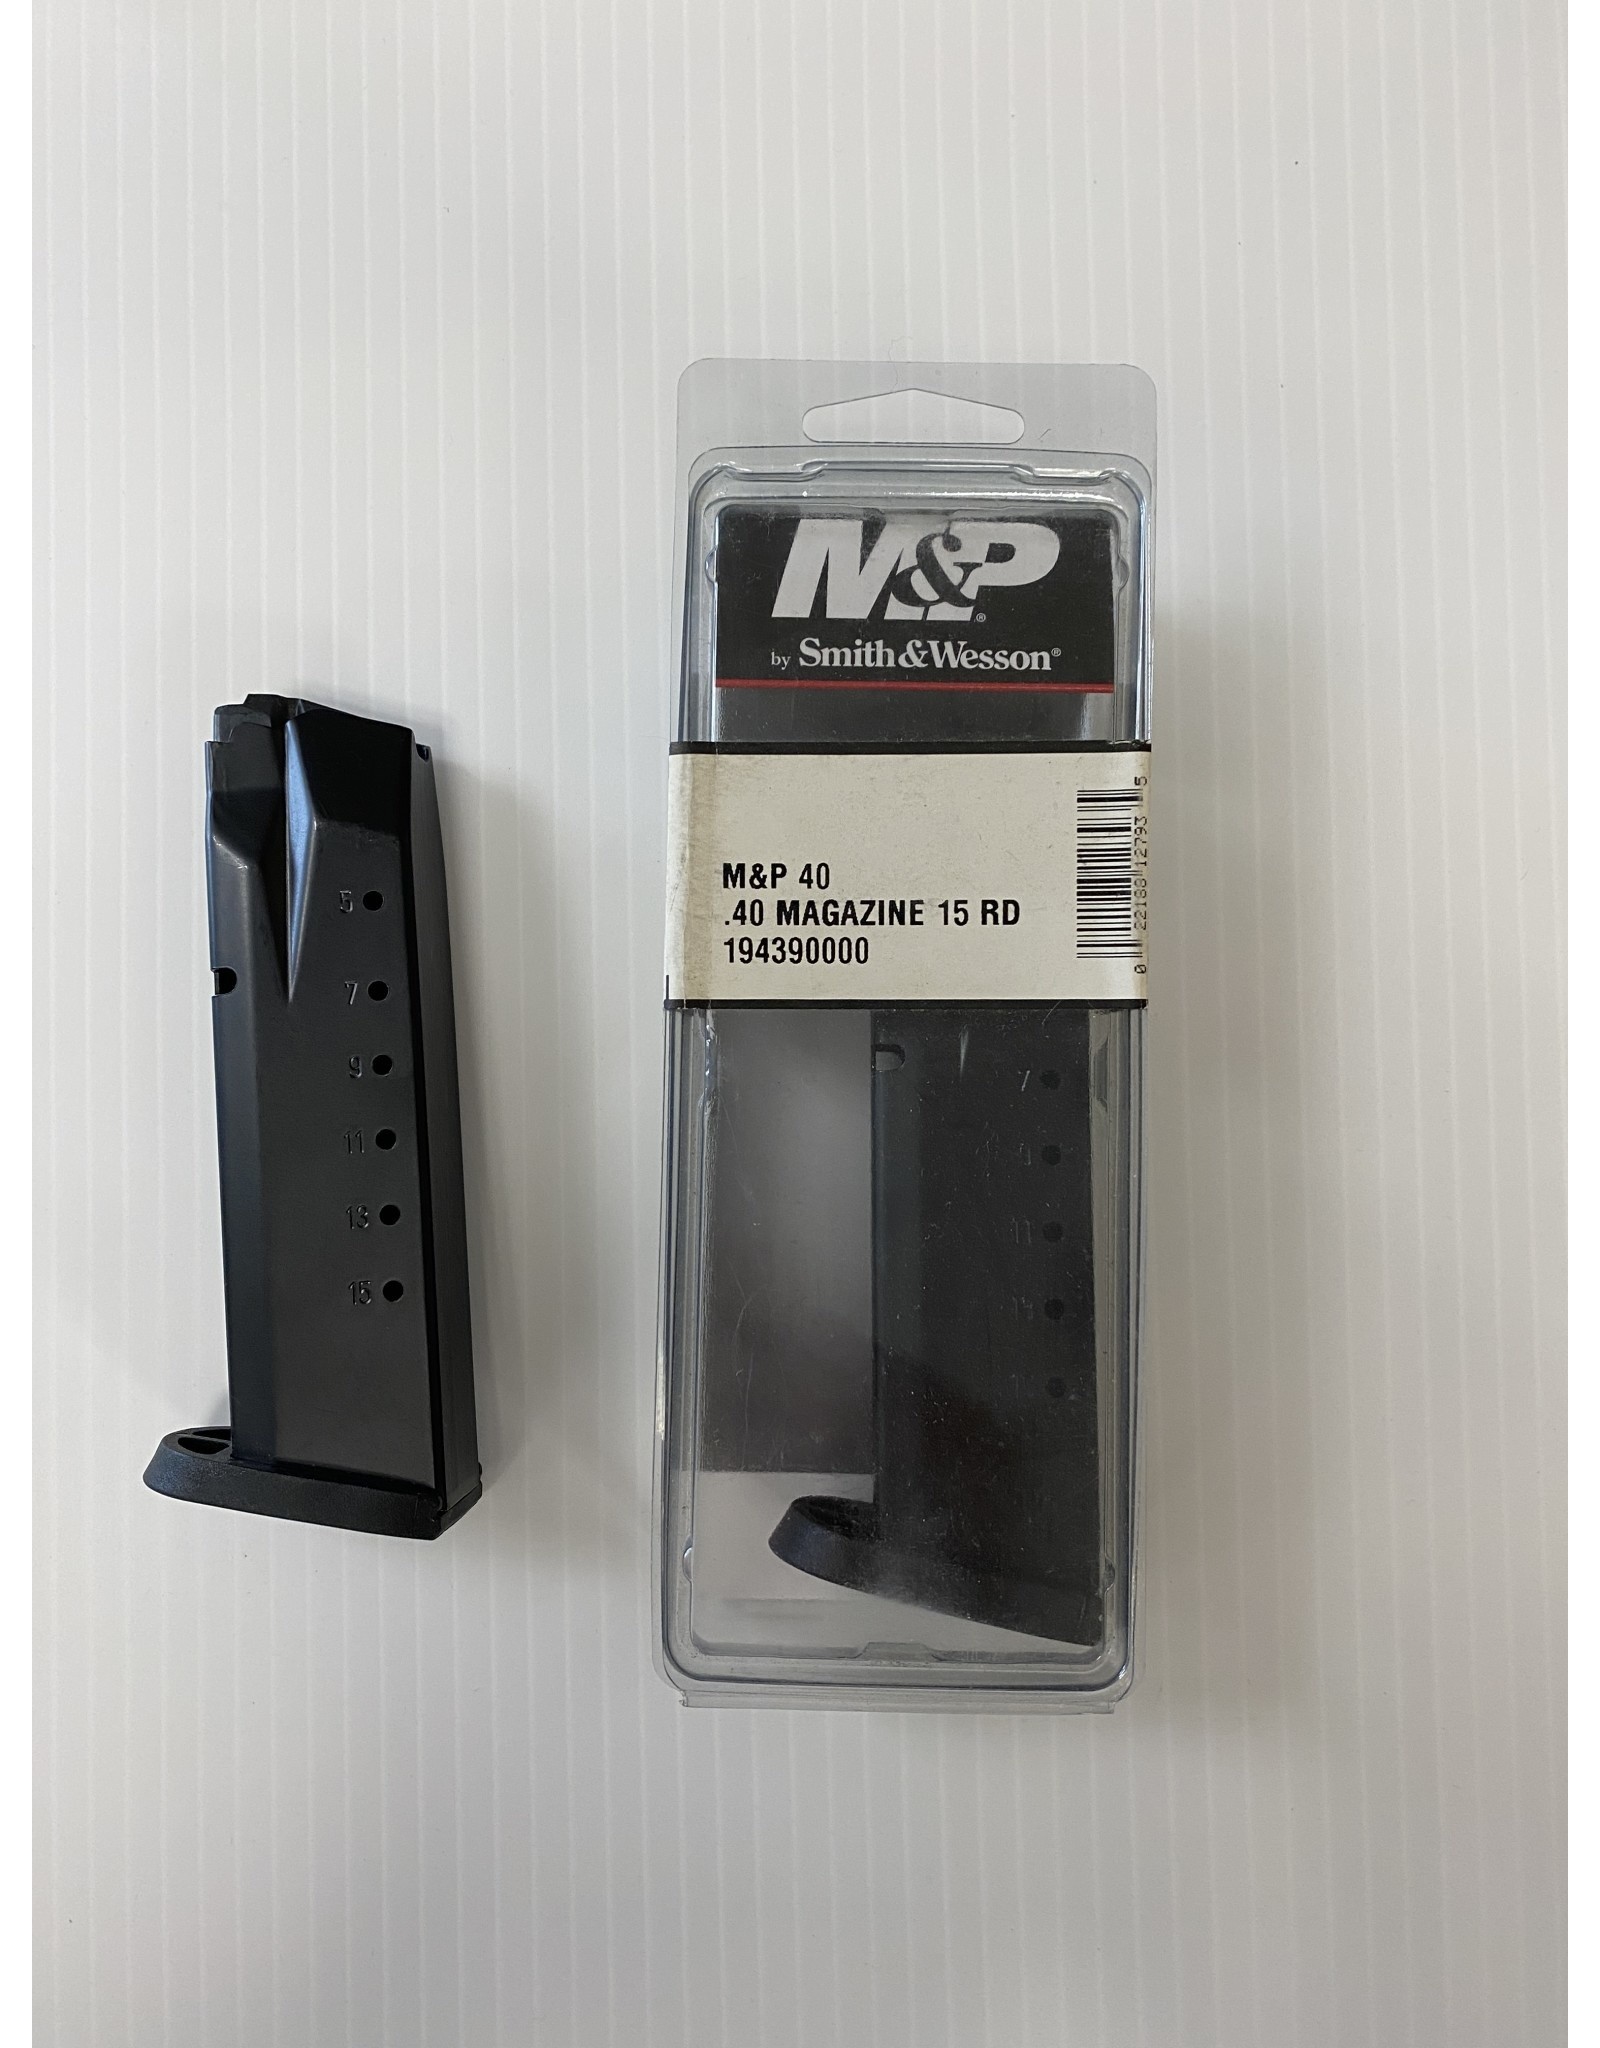 Smith + Wesson Smith and Wesson M&P 40 magazine 15 rd